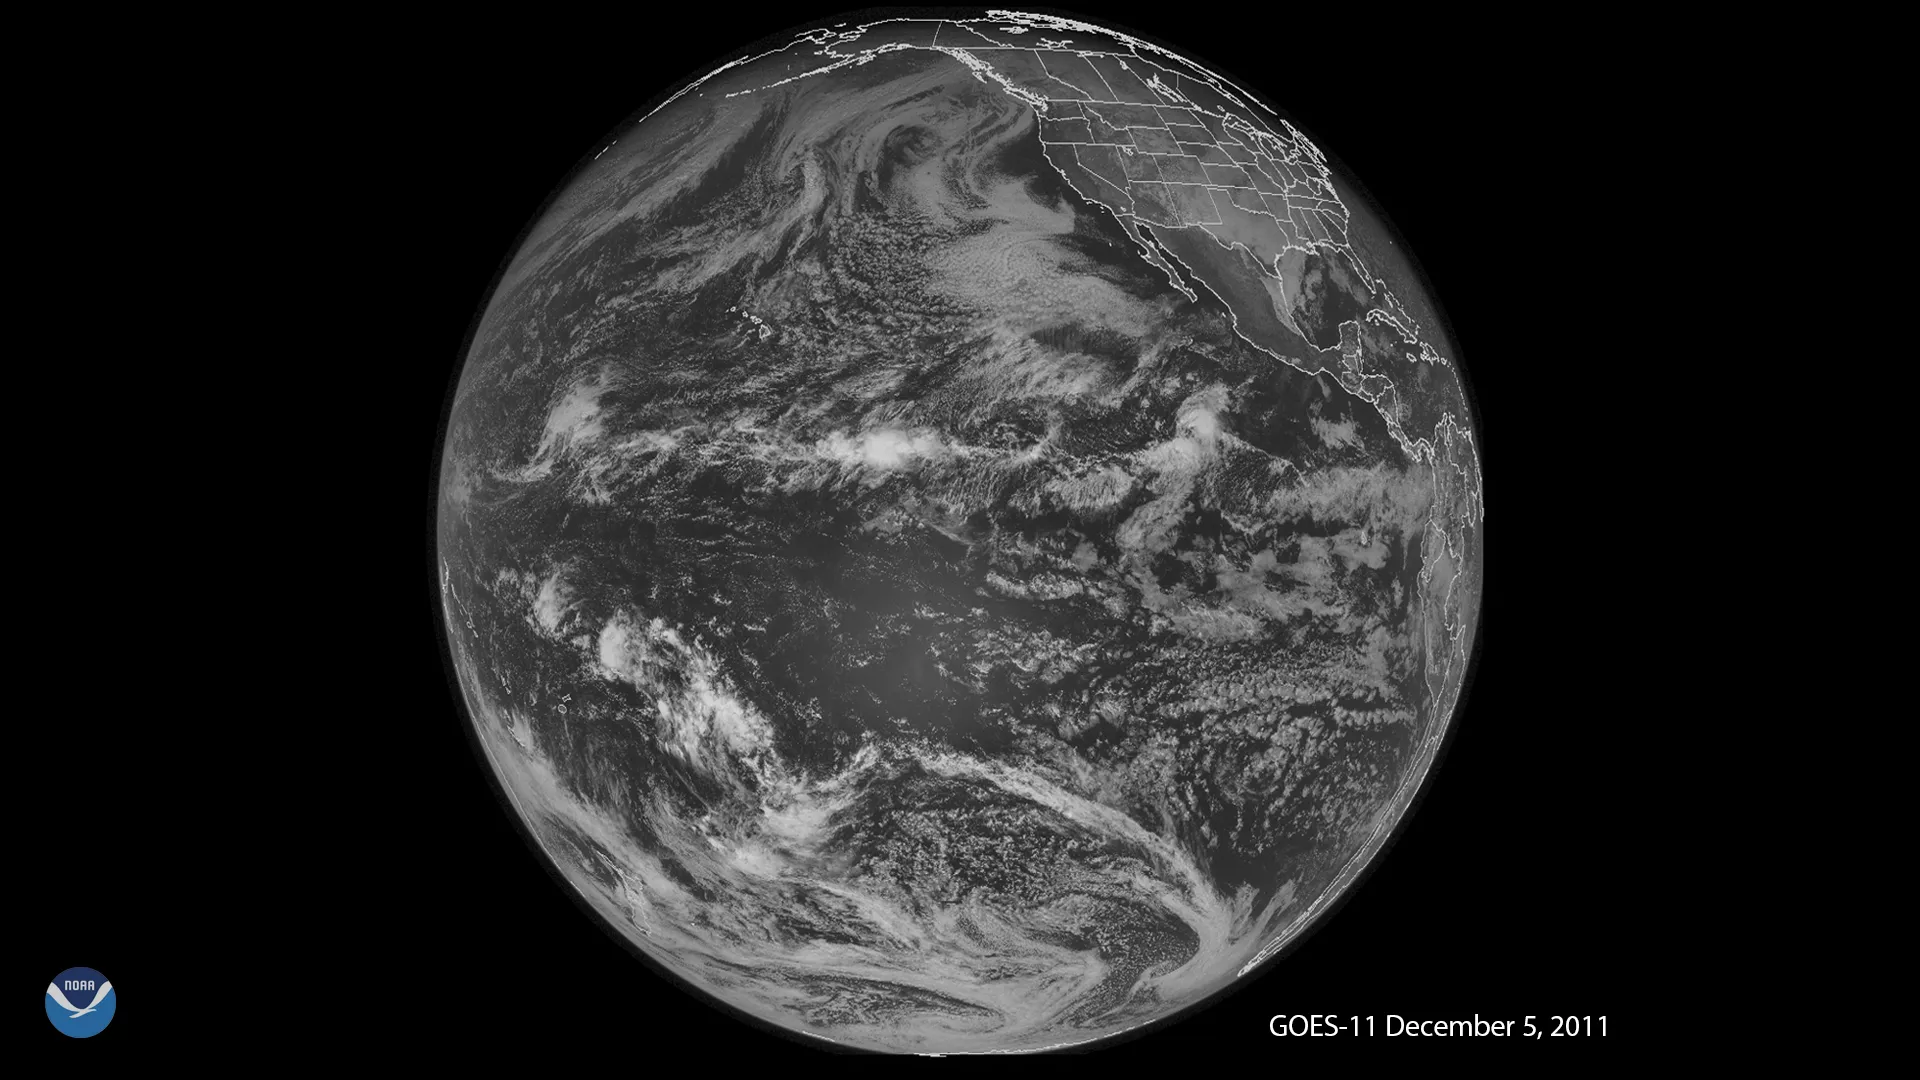 GOES-11 Full-disk view of Earth on December 5, 2011